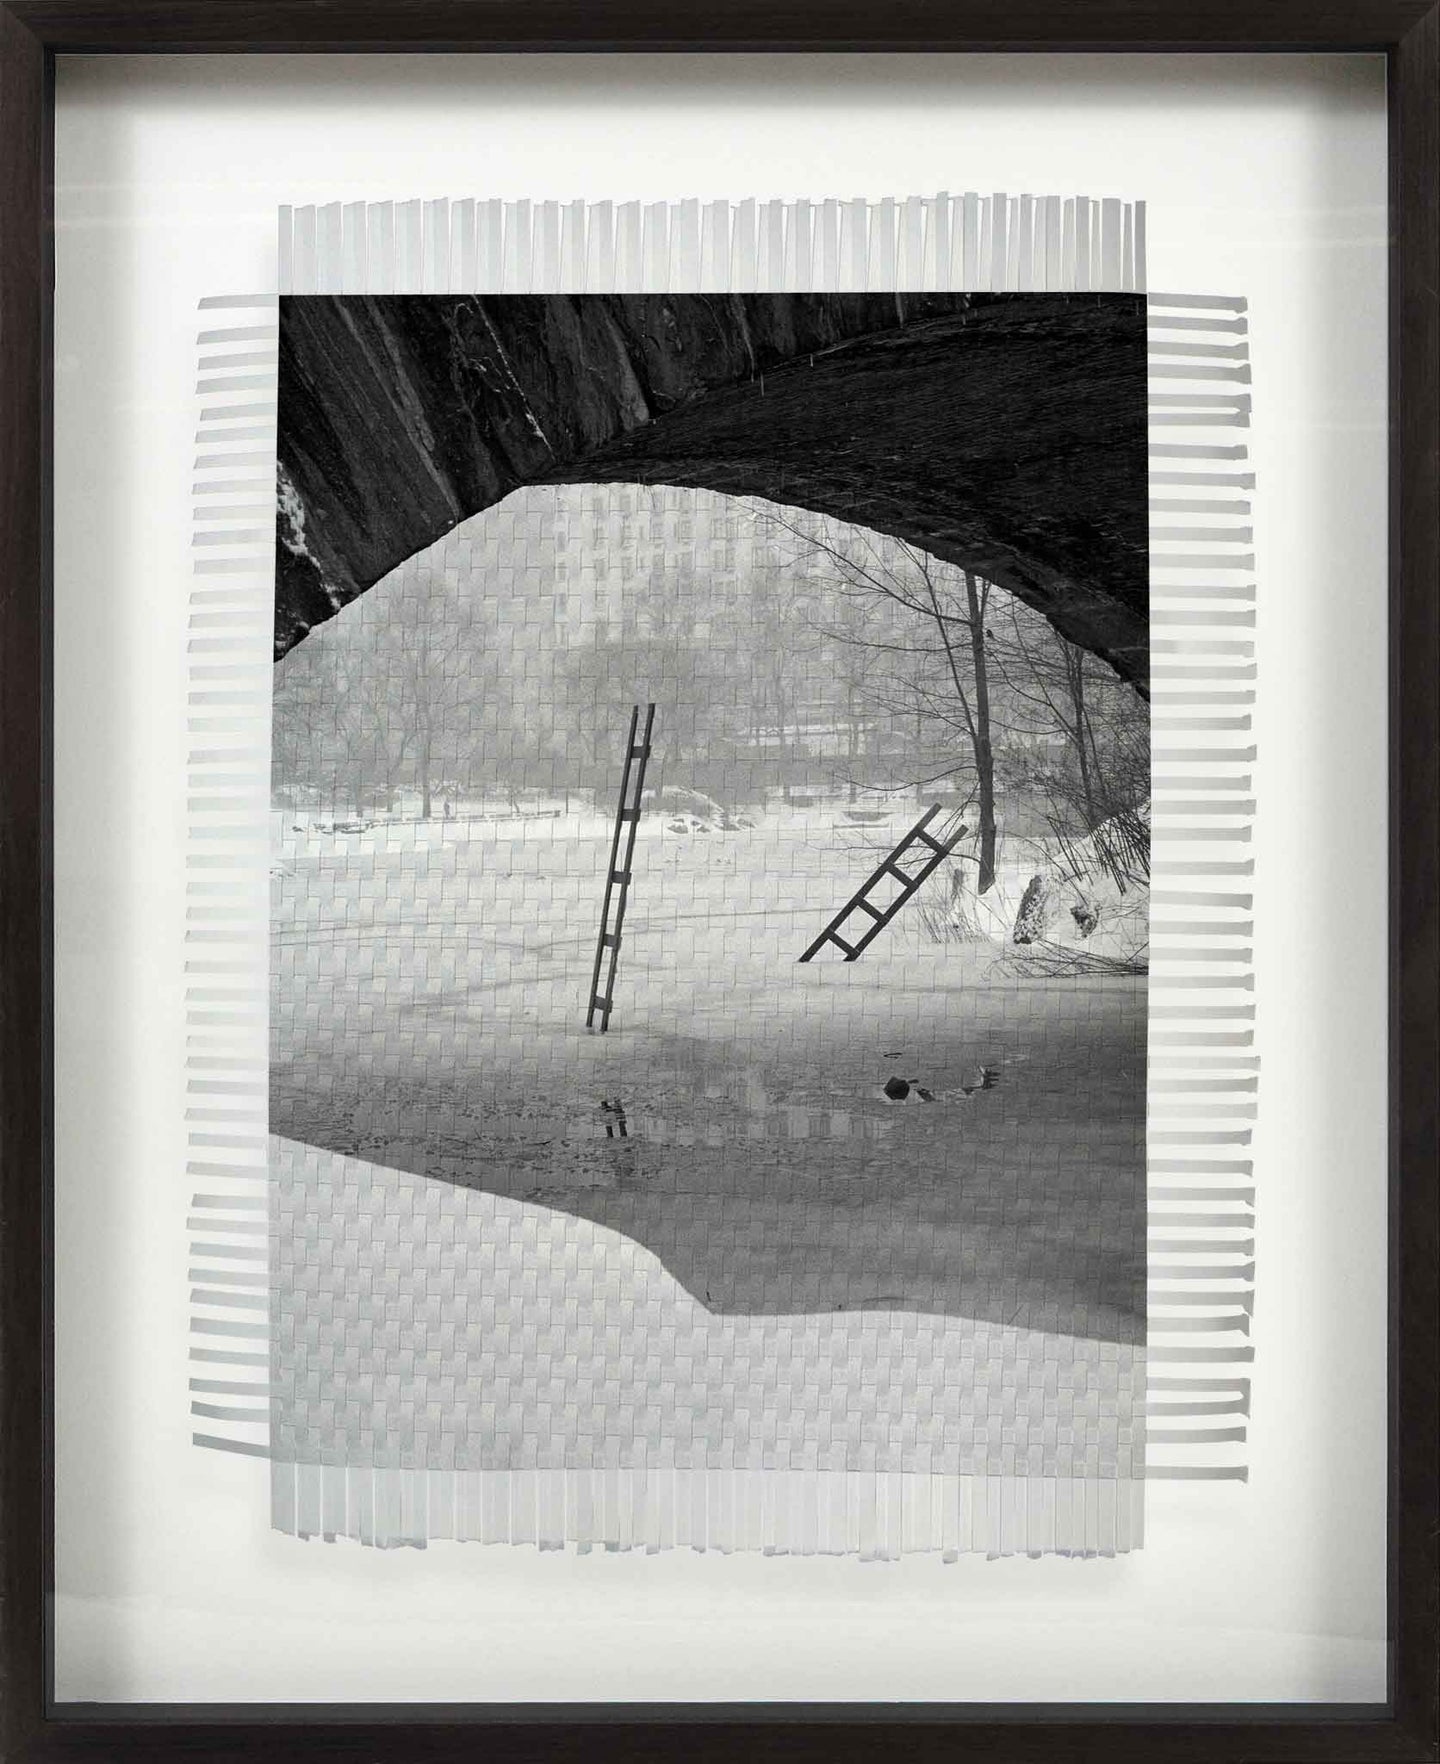 WINTER IN NEW YORK - HAND WOVEN PHOTOGRAPH